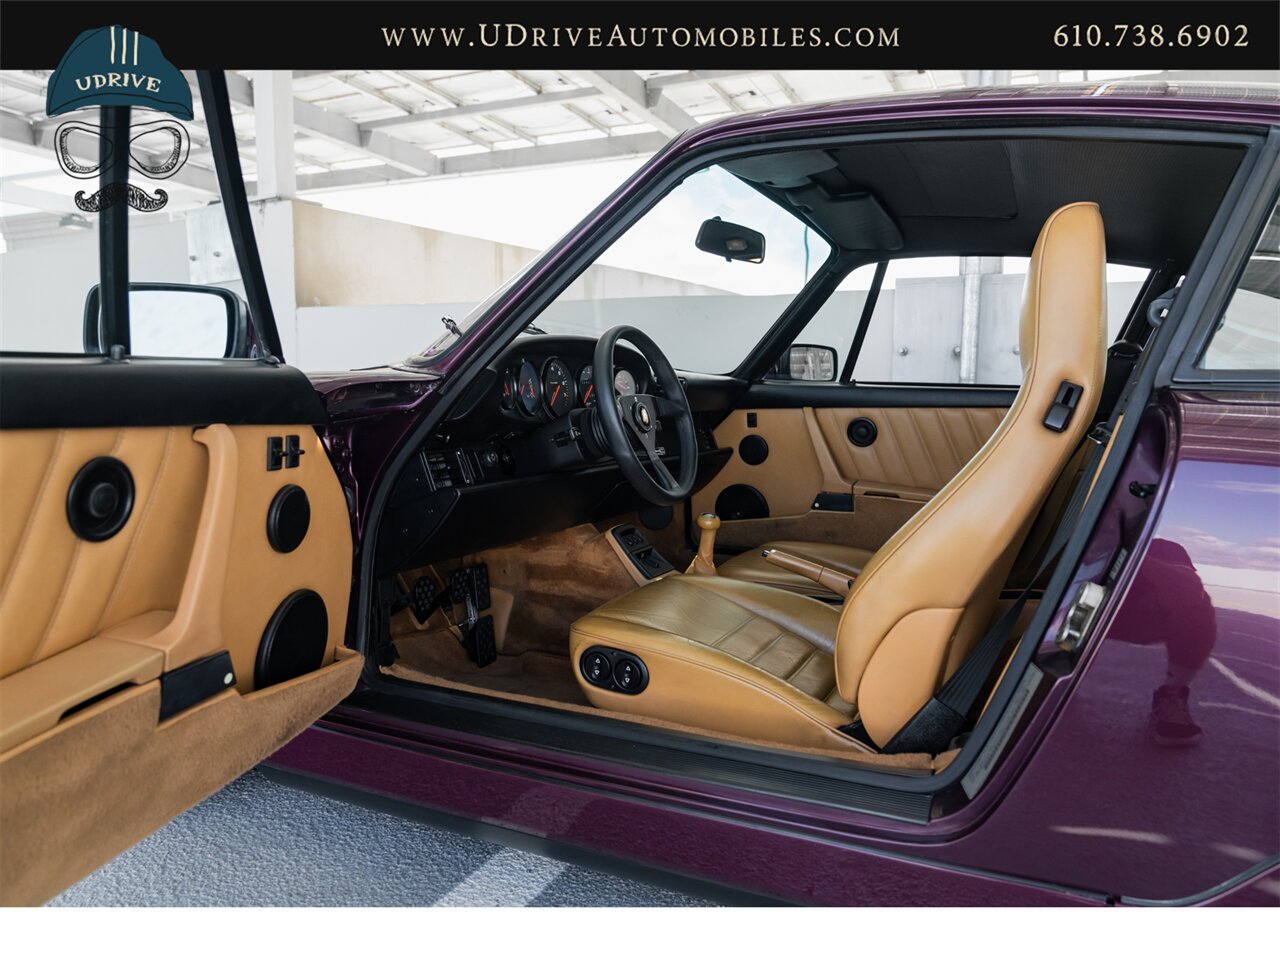 1991 Porsche 911 Carrera 2  5 Speed $57k in Service and UpGrades Since 2020 - Photo 36 - West Chester, PA 19382